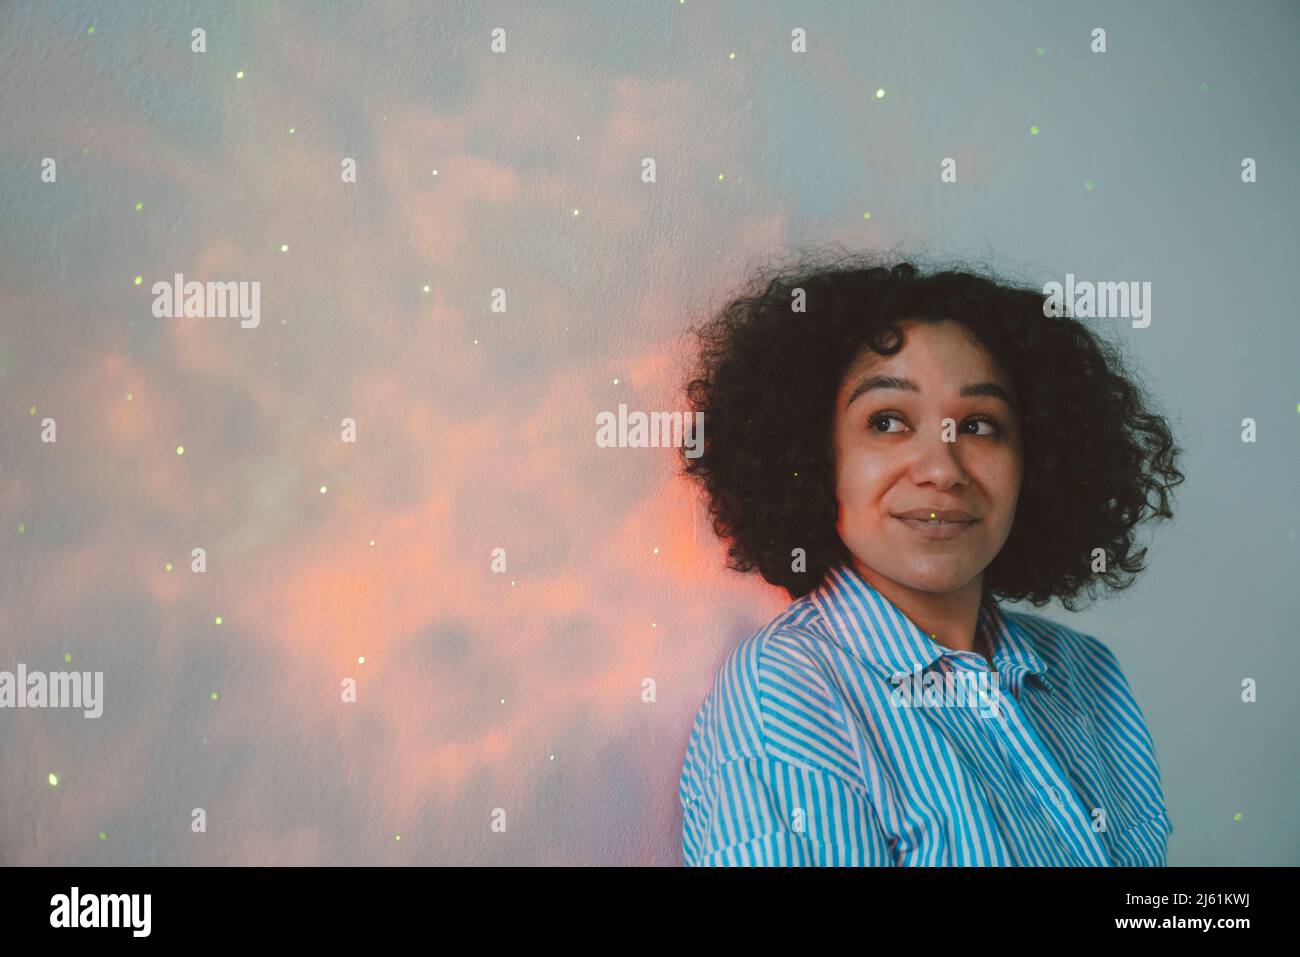 Smiling woman looking at astro light effect falling on wall Stock Photo